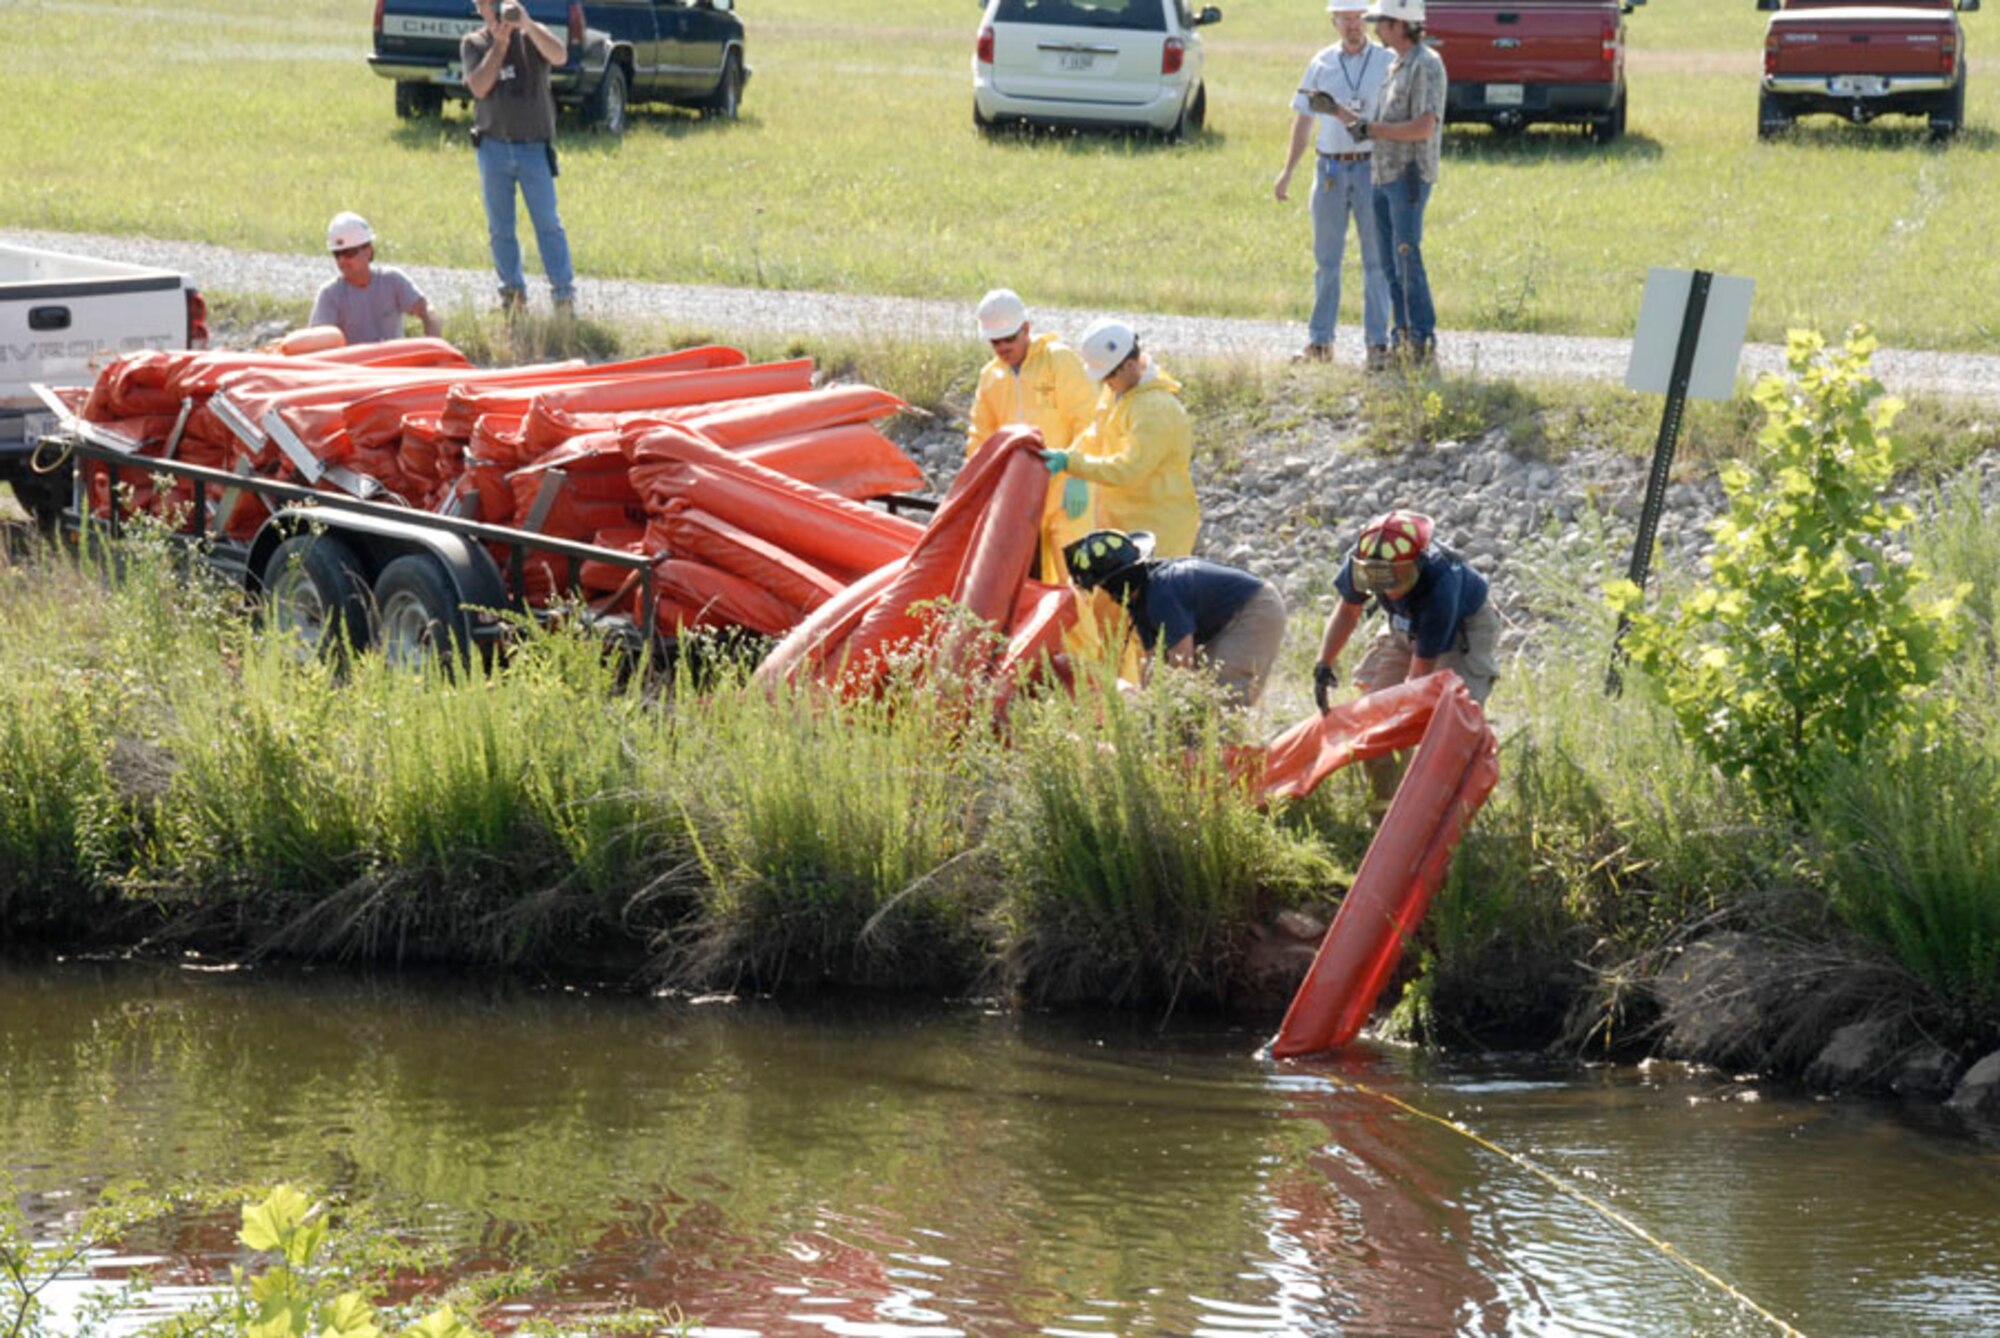 Arnold Engineering Development Center’s hazardous spill response team members, including Aerospace Testing Alliance Fire Department first responders, work to deploy a section of fuel buoys to contain a simulated fuel spill in the ditch behind pumping station number two during the June exercise at Arnold Air Force Base. (Photo by Rick Goodfriend)